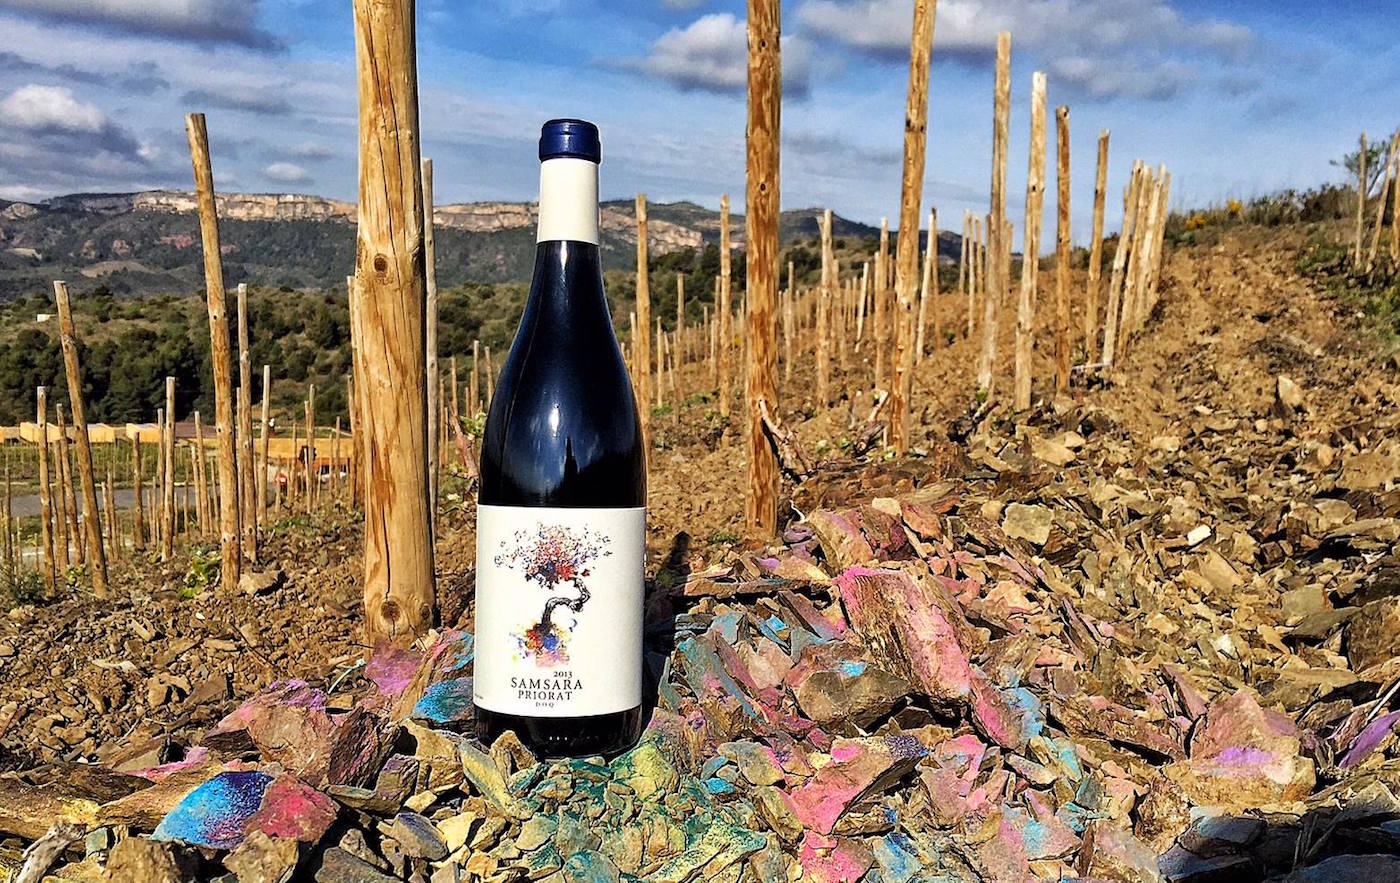 Interview: Miquel Coca of Coca i Fitó talks about the difference between Montsant and Priorat